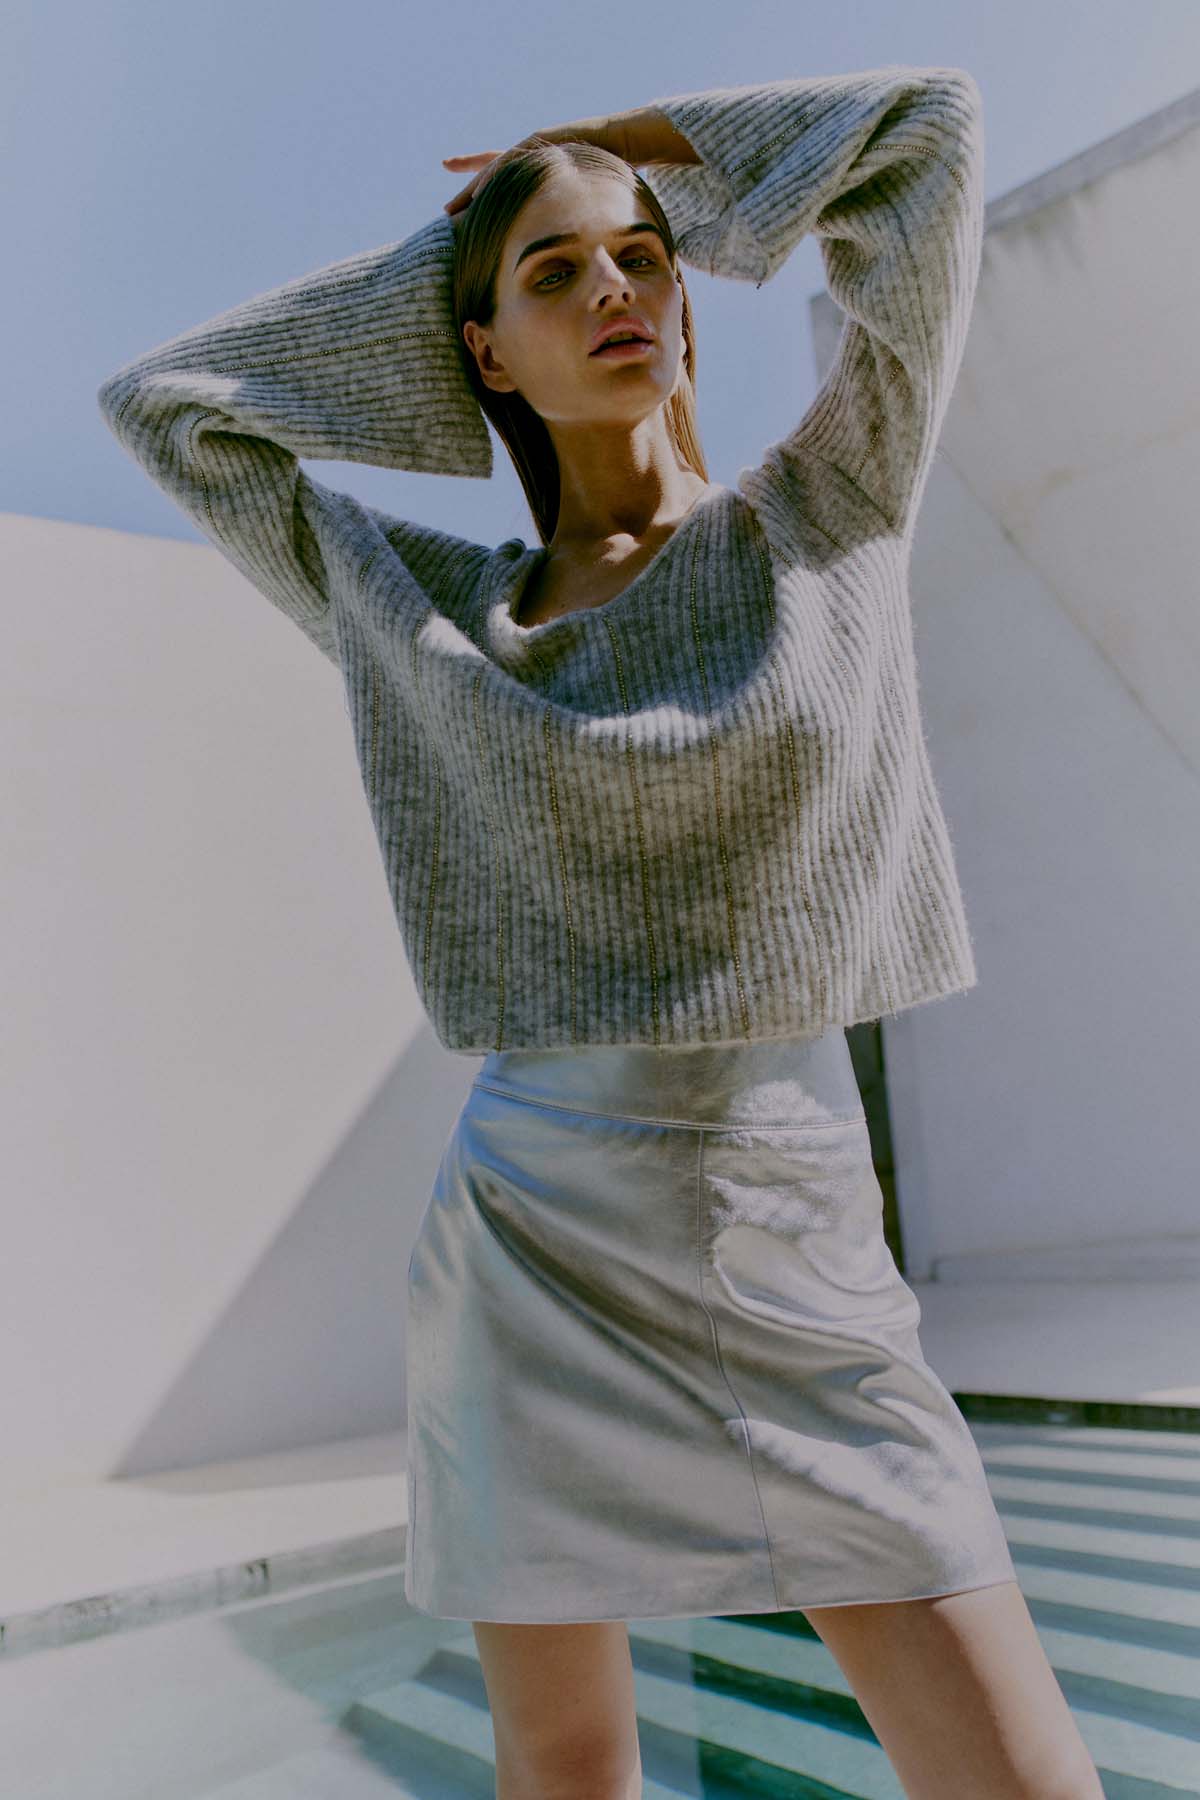 CMIBRA - KNITTED PULLOVER WITH RHINESTONES IN GREY